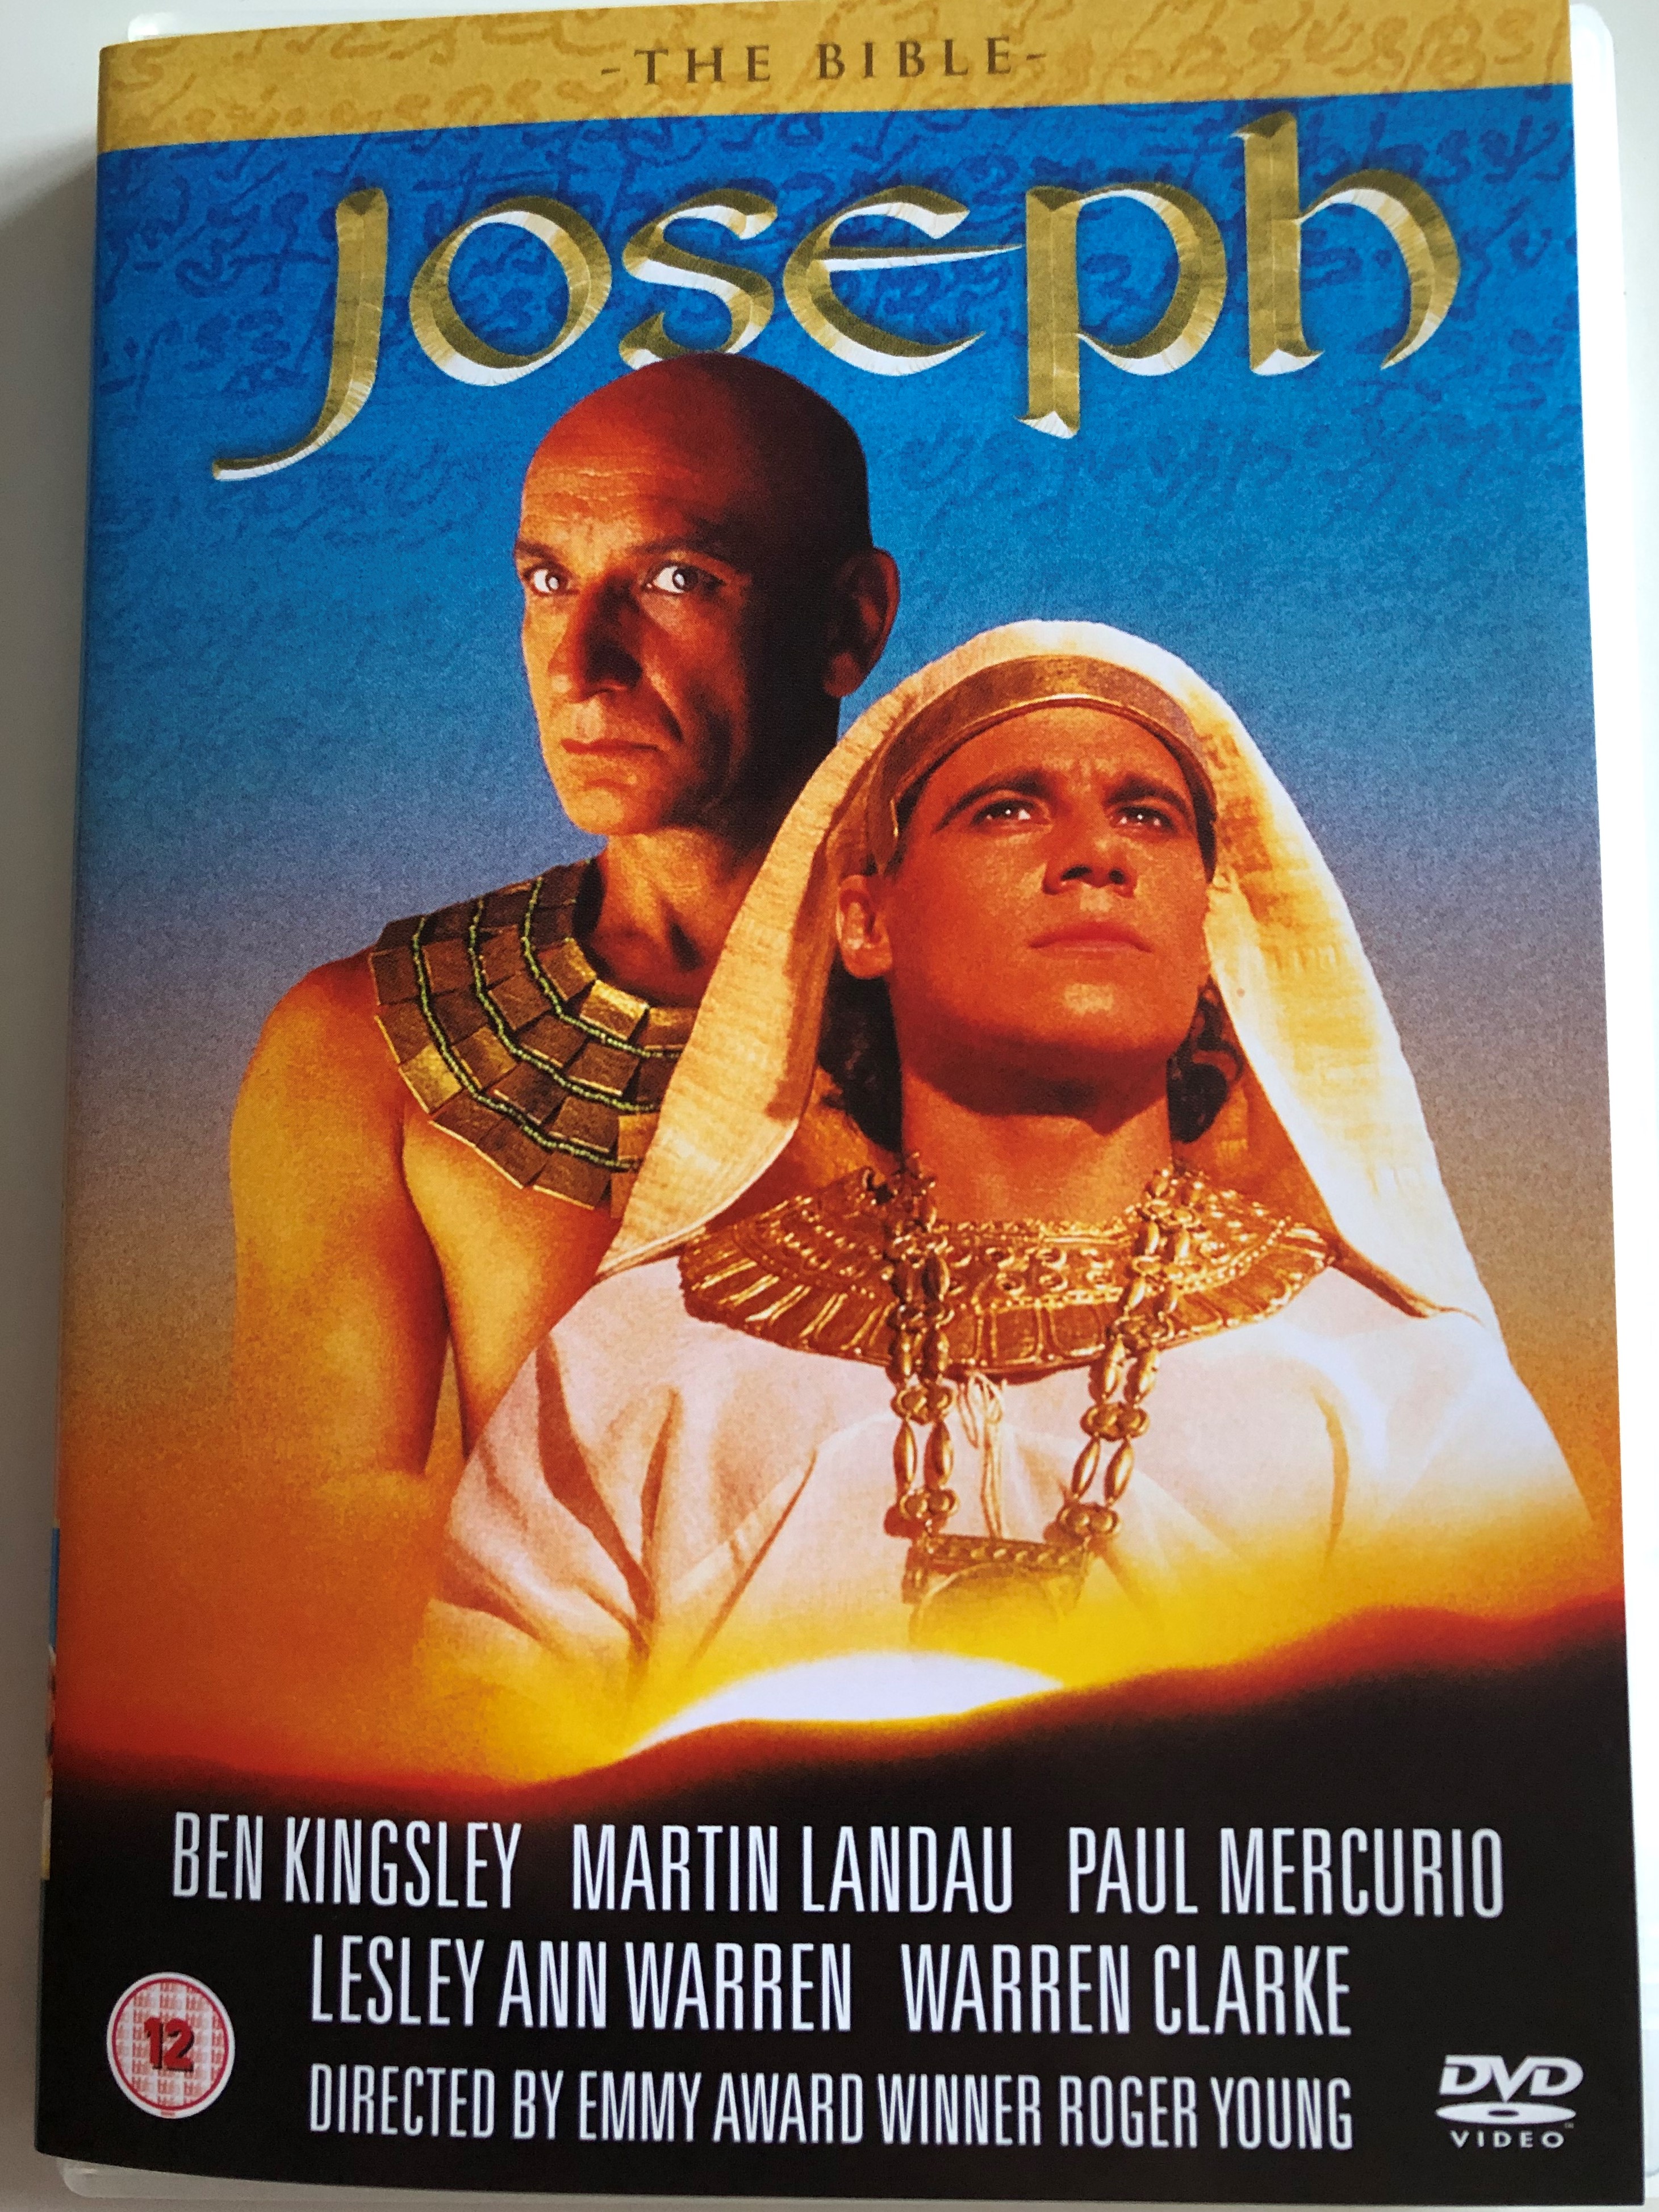 The Bible - Joseph DVD 1995 / Directed by Roger Young / Starring